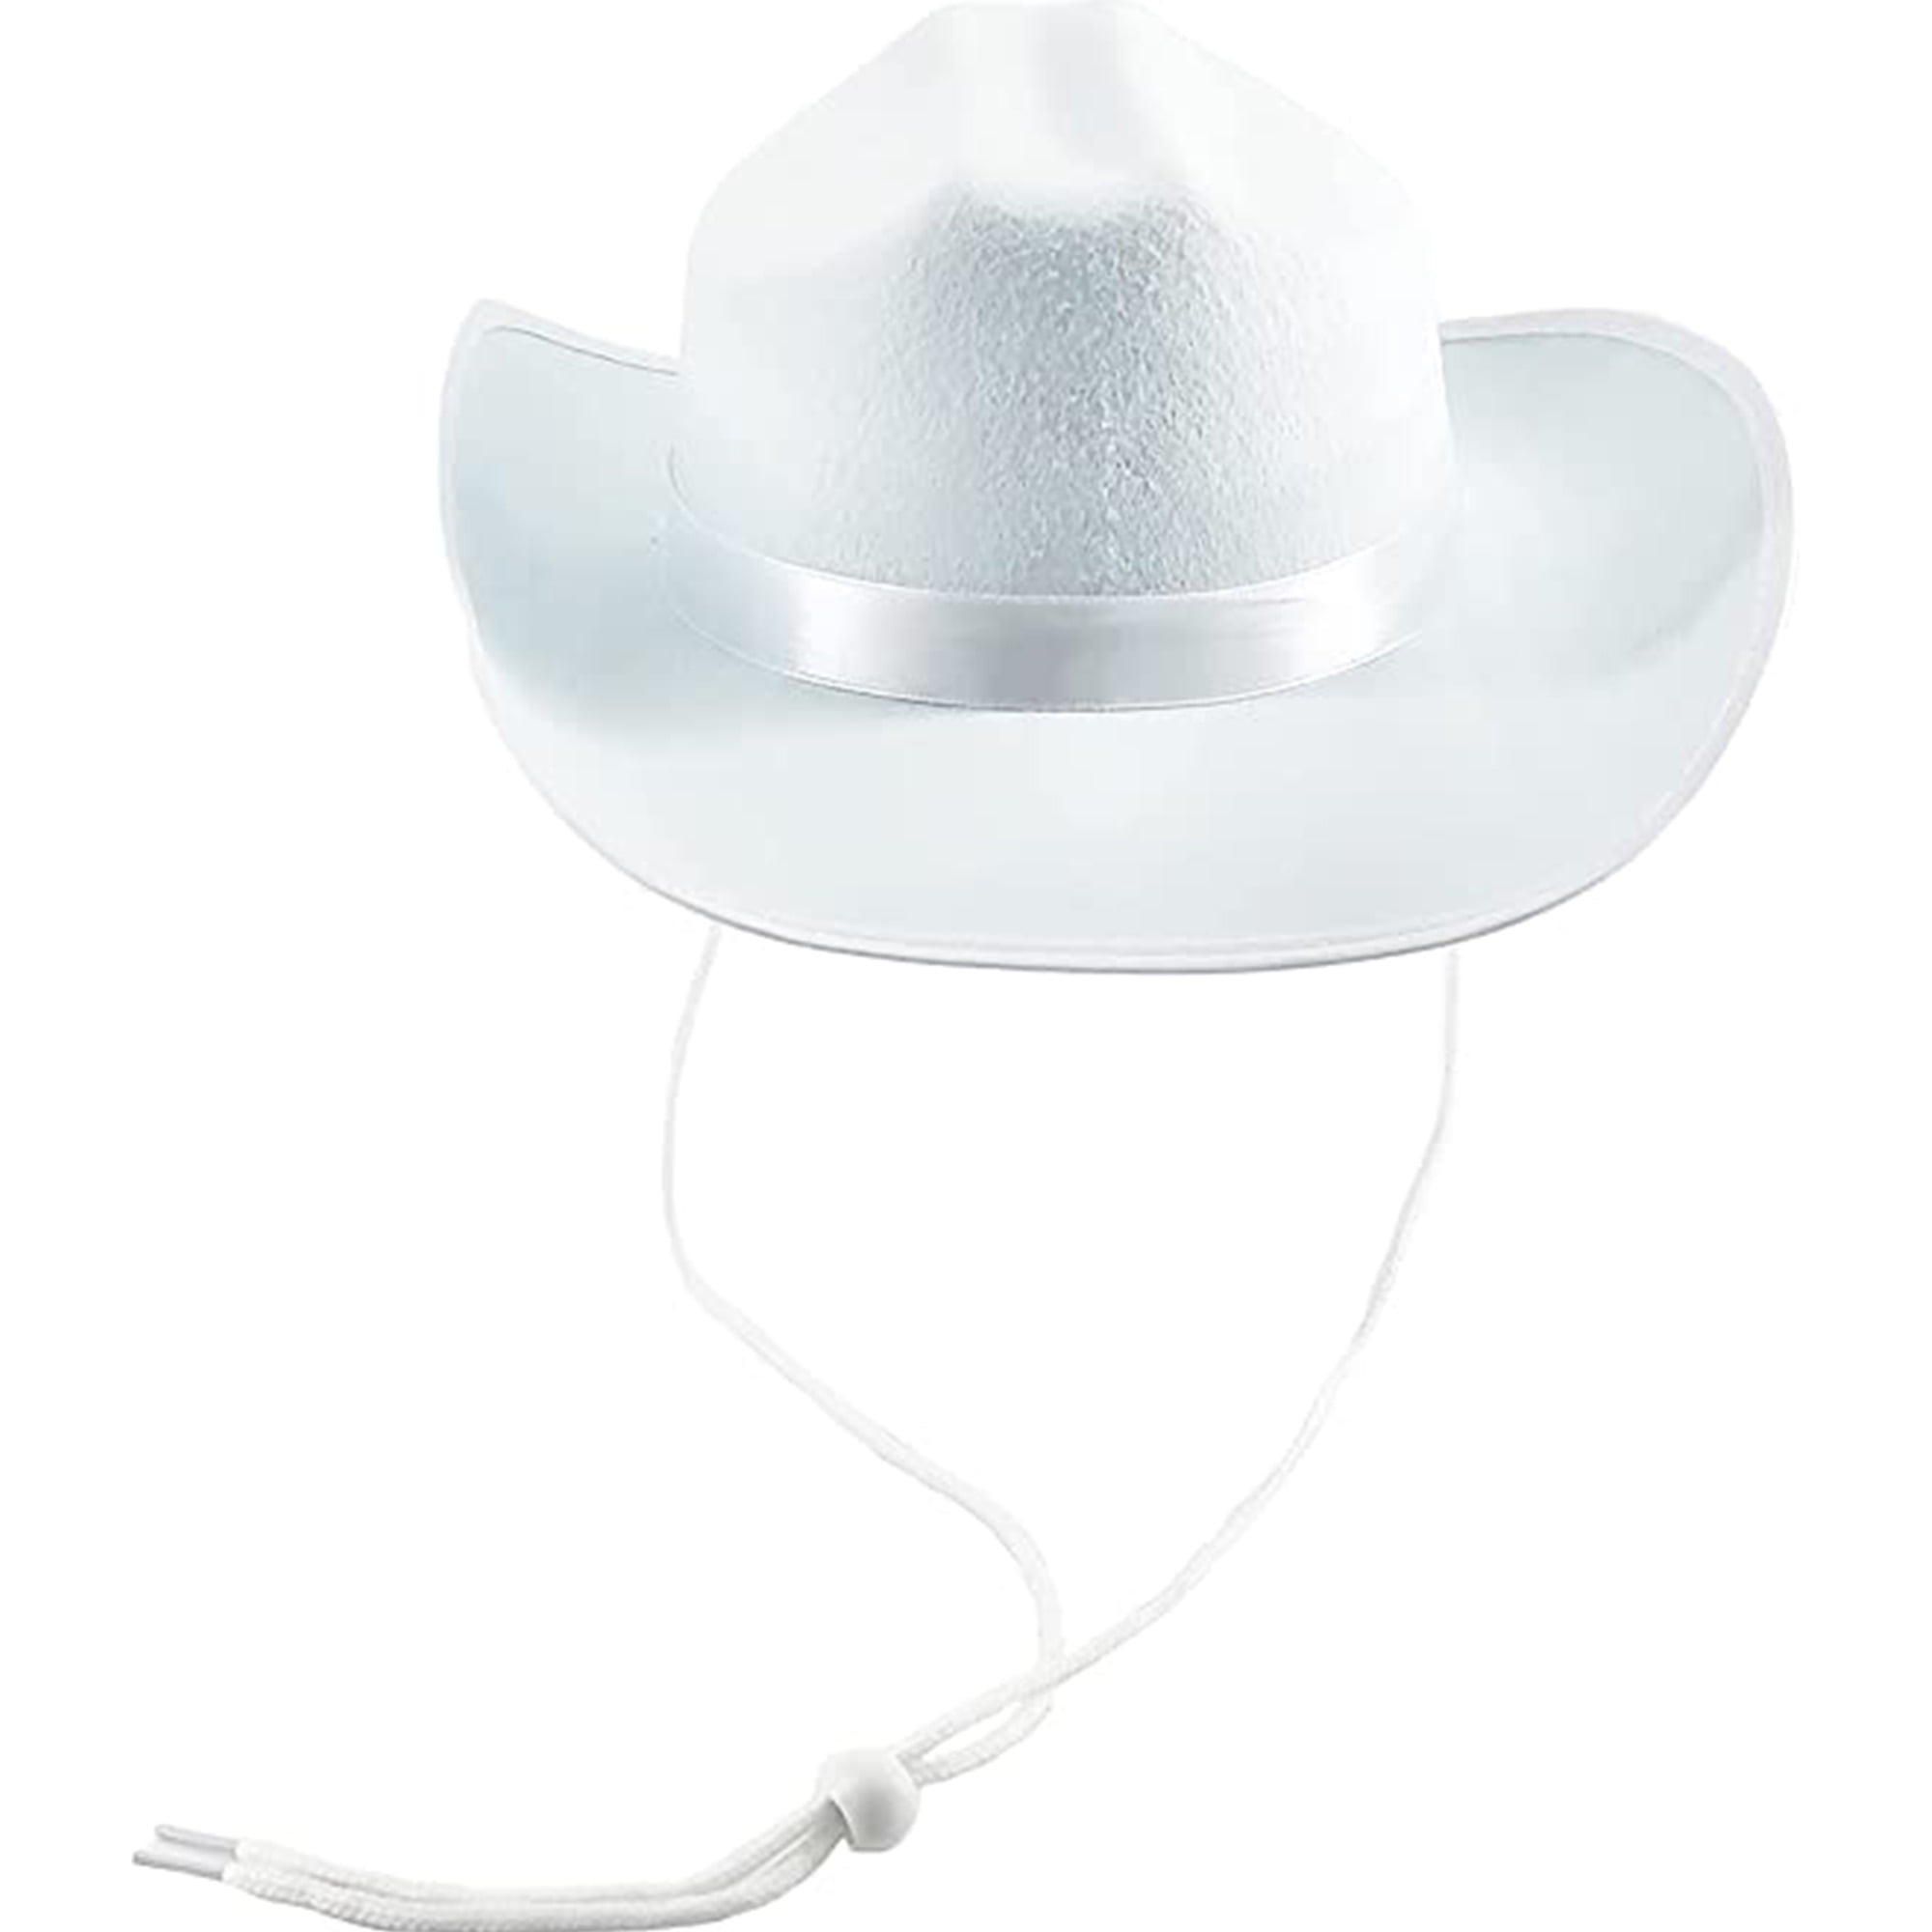 White Cowboy Hat - (Pack of 2) Felt Cowboy Hats for Women and Men with  Adjustable Neck Draw String, for Dress-Up Parties and Play Costume  Accessories